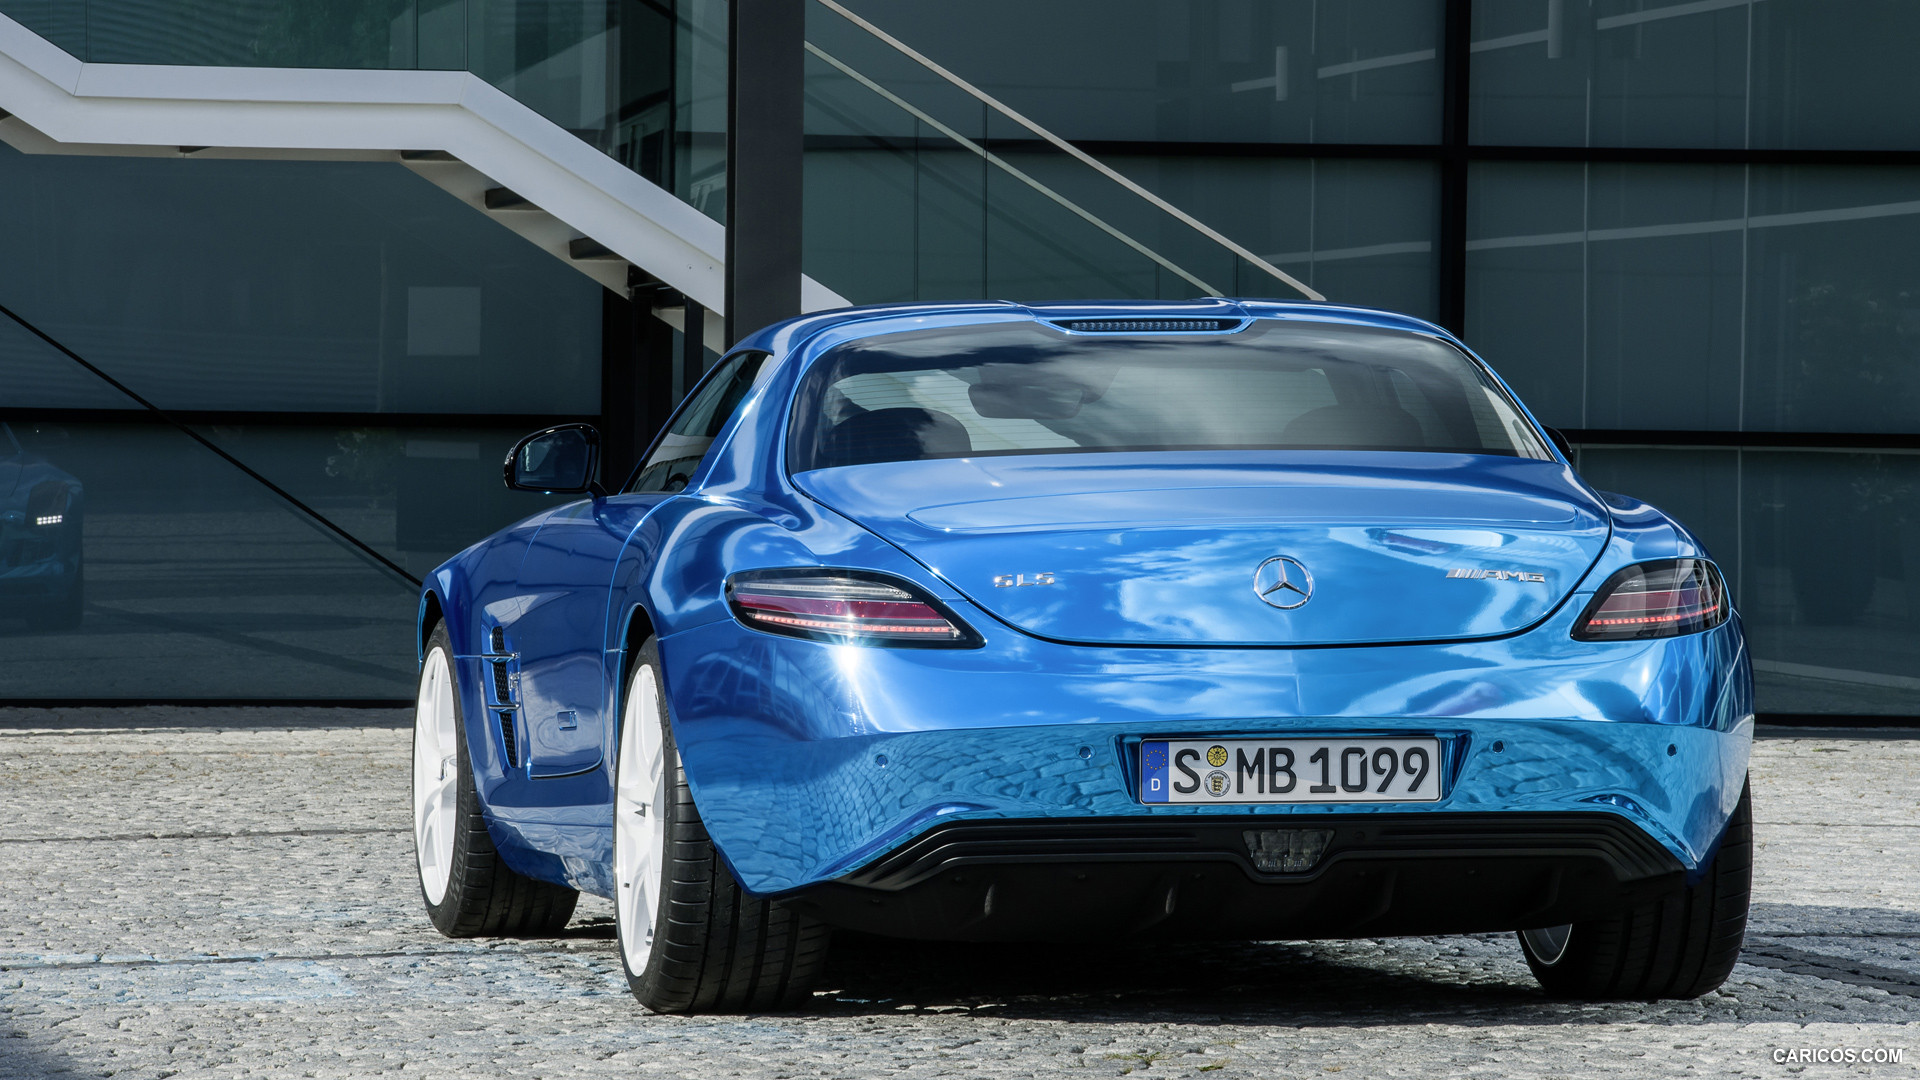 2014 Mercedes-Benz SLS AMG Coupe Electric Drive  - Rear, #21 of 47